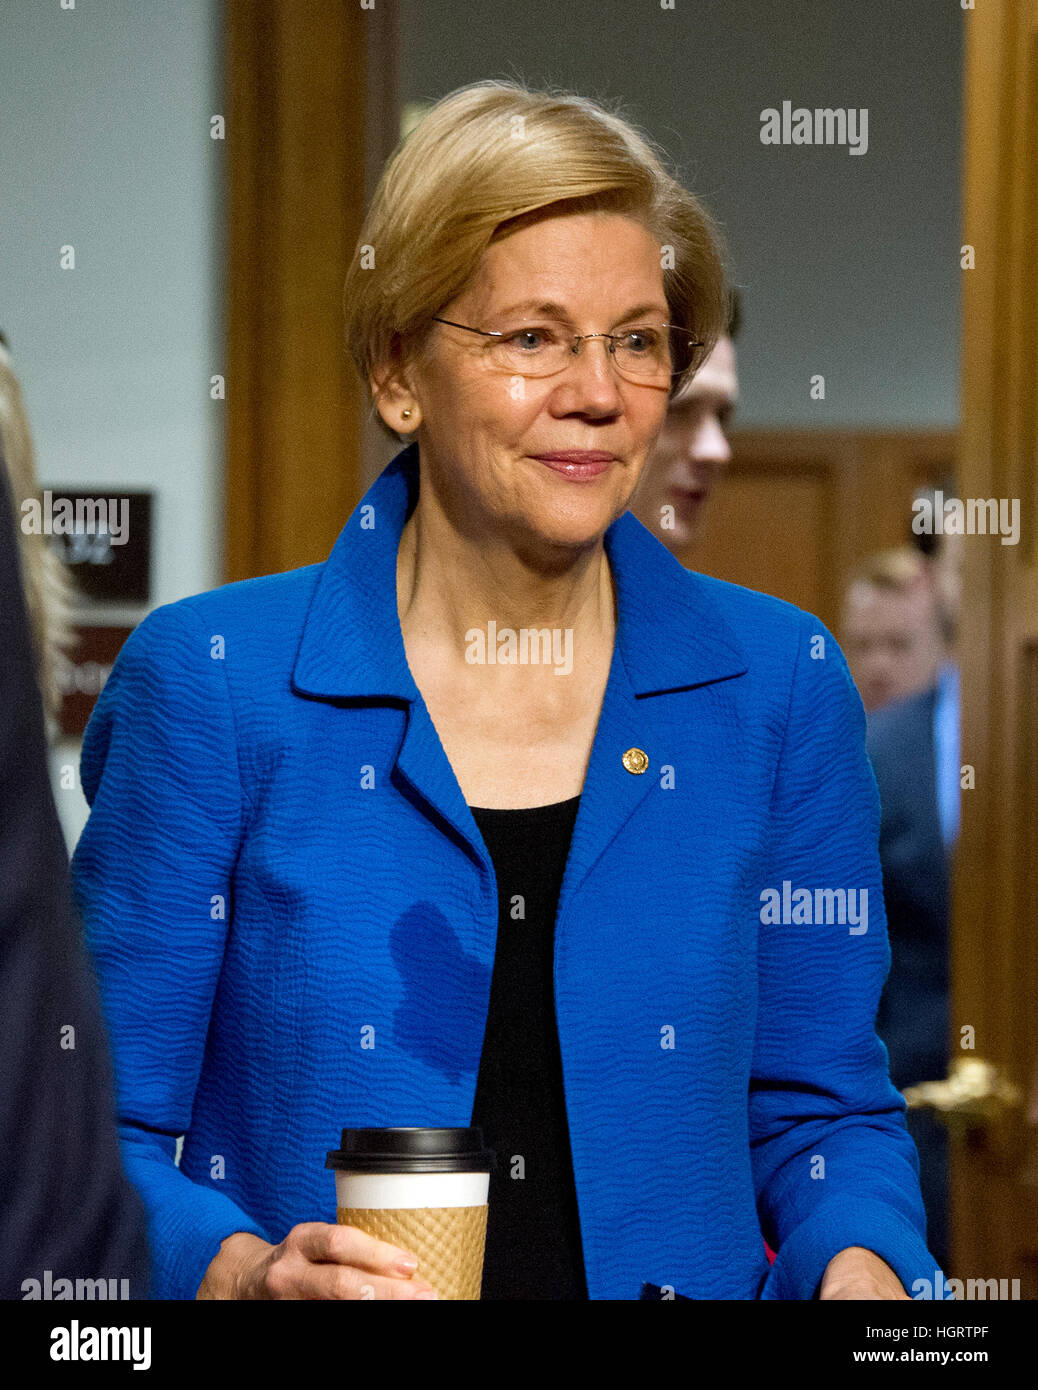 Washington DC, USA. 12th January 2017. United States Senator Elizabeth Warren (Democrat of Massachusetts) arrives for the United States Senate Committee on Armed Services confirmation hearing on the nomination of US Marine Corps General James N. Mattis (retired) to be Secretary of Defense on Capitol Hill in Washington, DC on Thursday, January 12, 2017. Credit: MediaPunch Inc/Alamy Live News Stock Photo